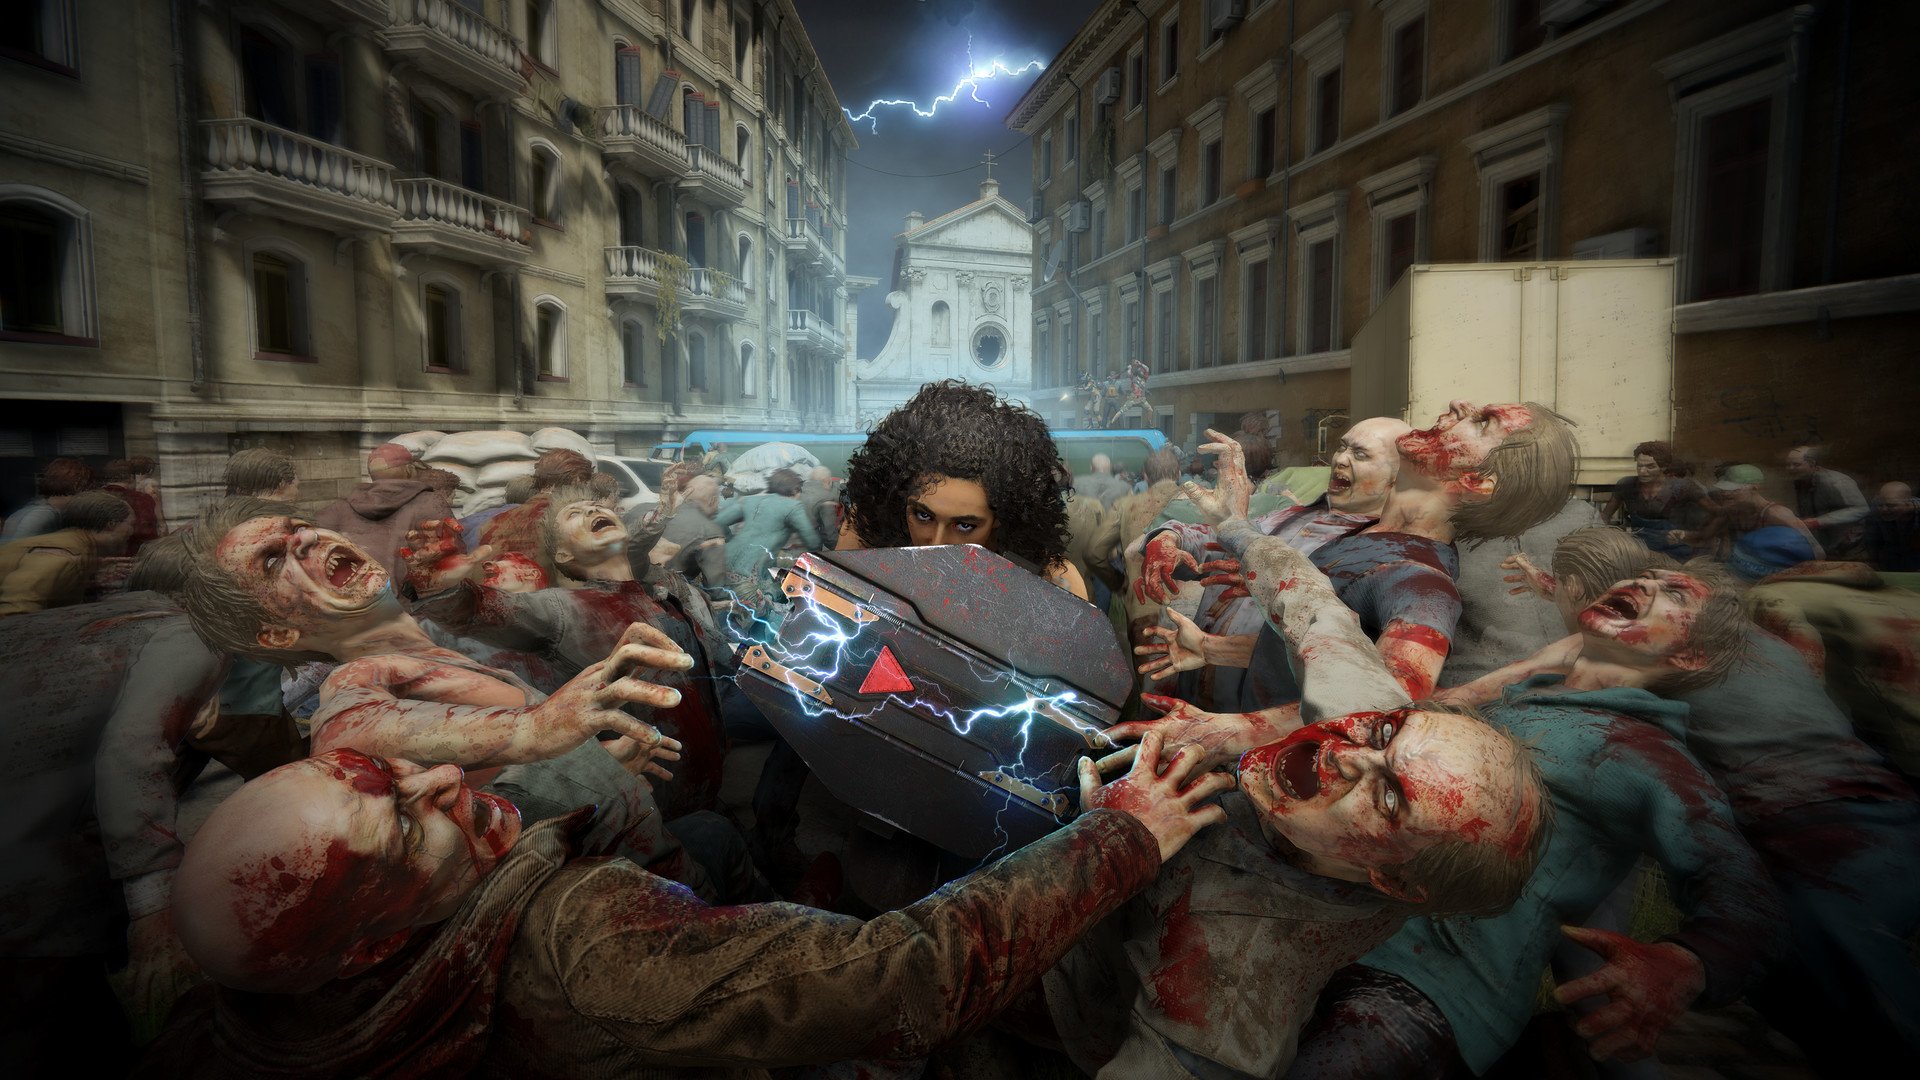 World War Z's Aftermath expansion adds melee weapons, crossplay